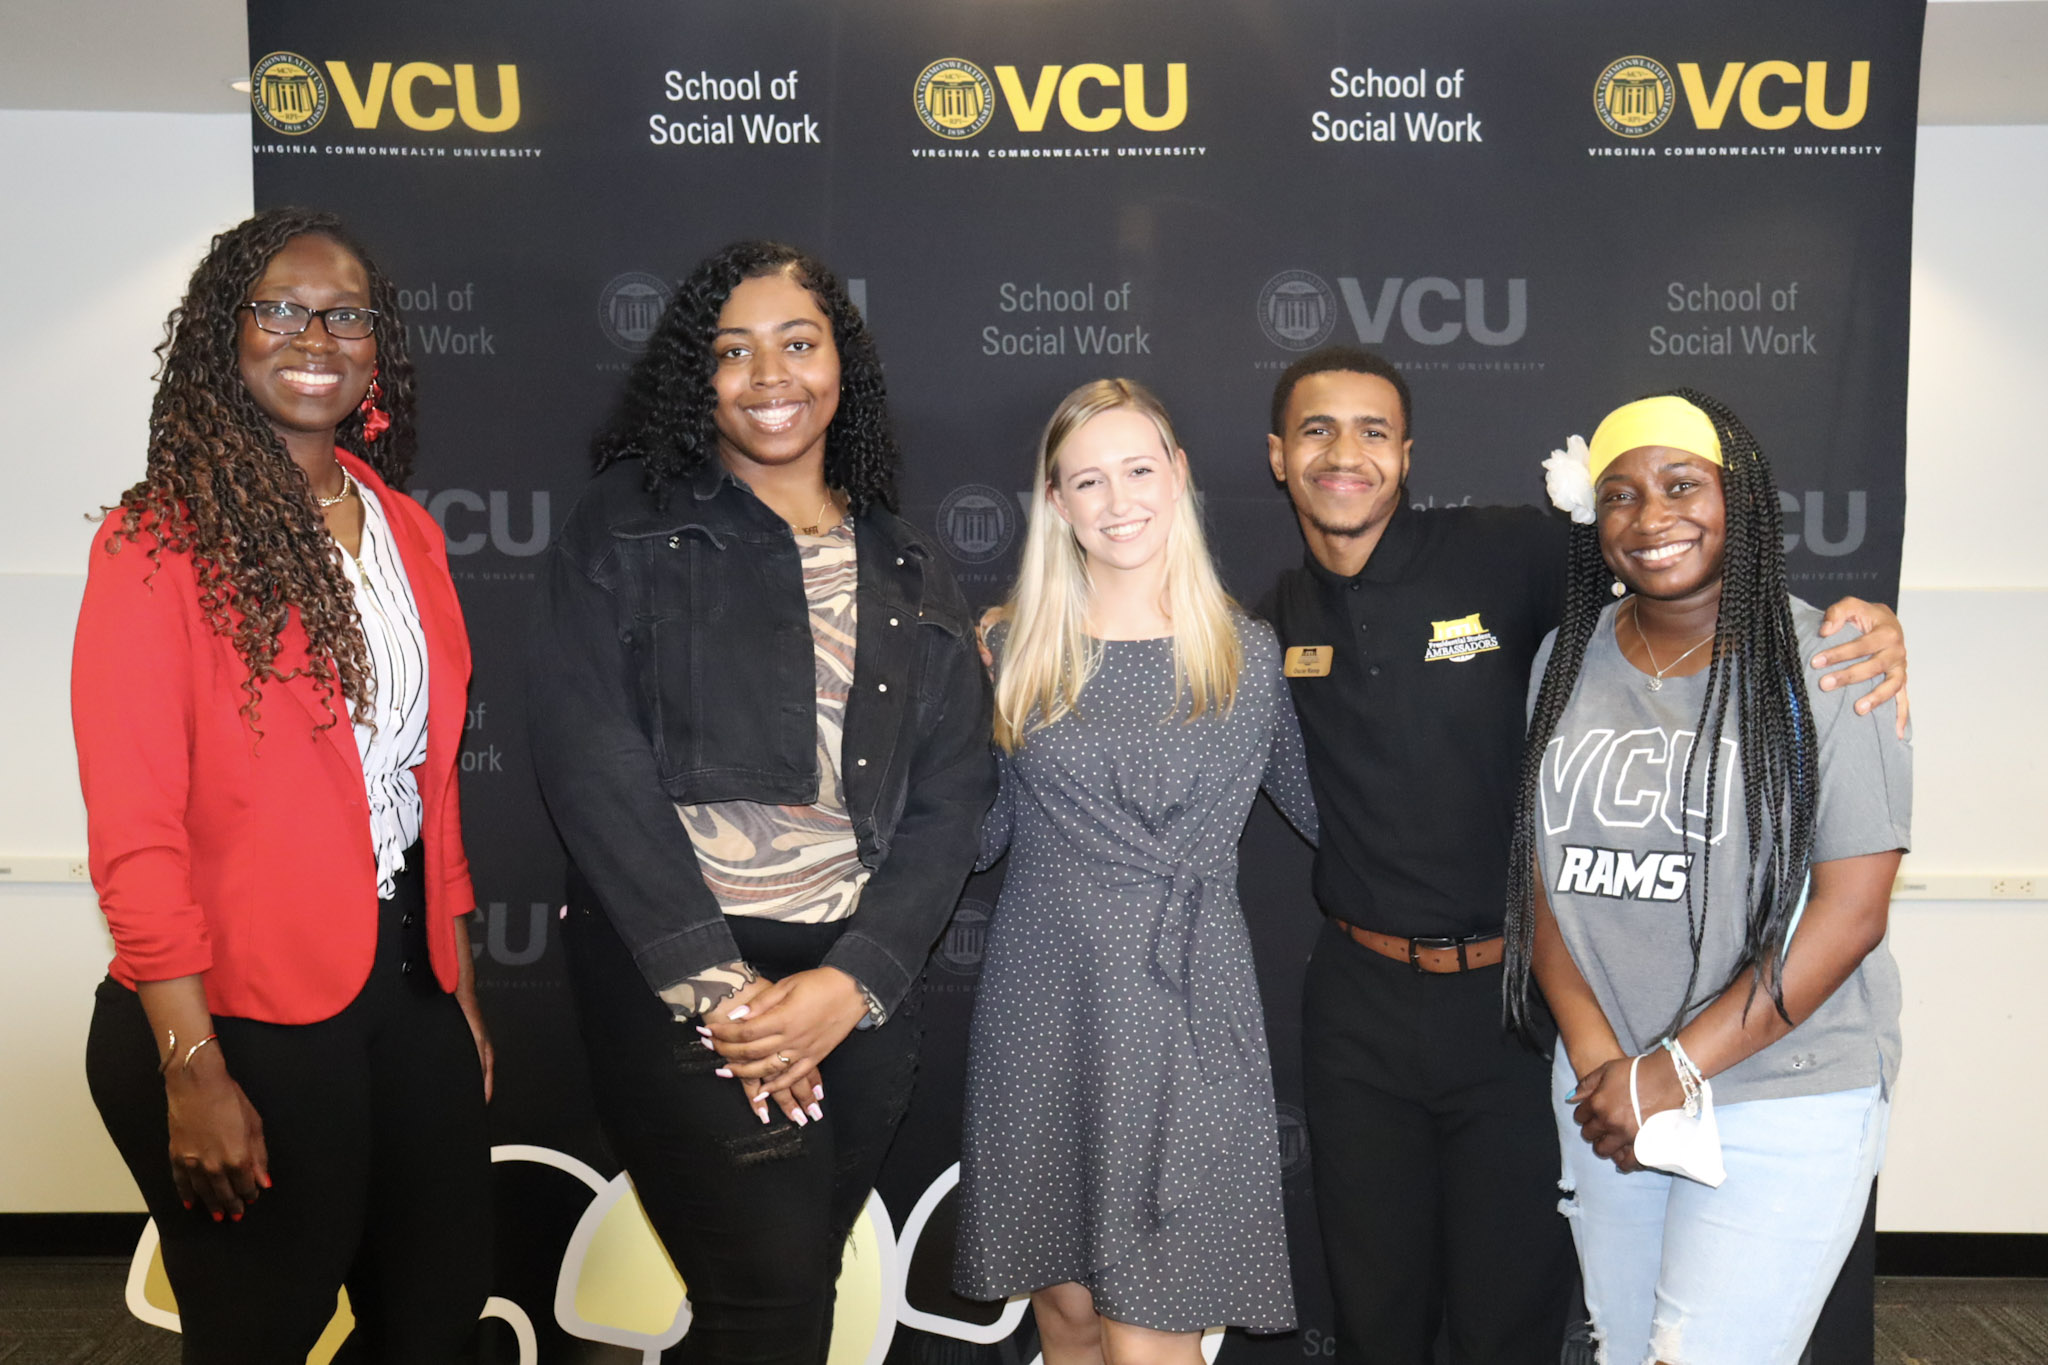 Five social work students pose in front of a VCU School of Social Work backdrop